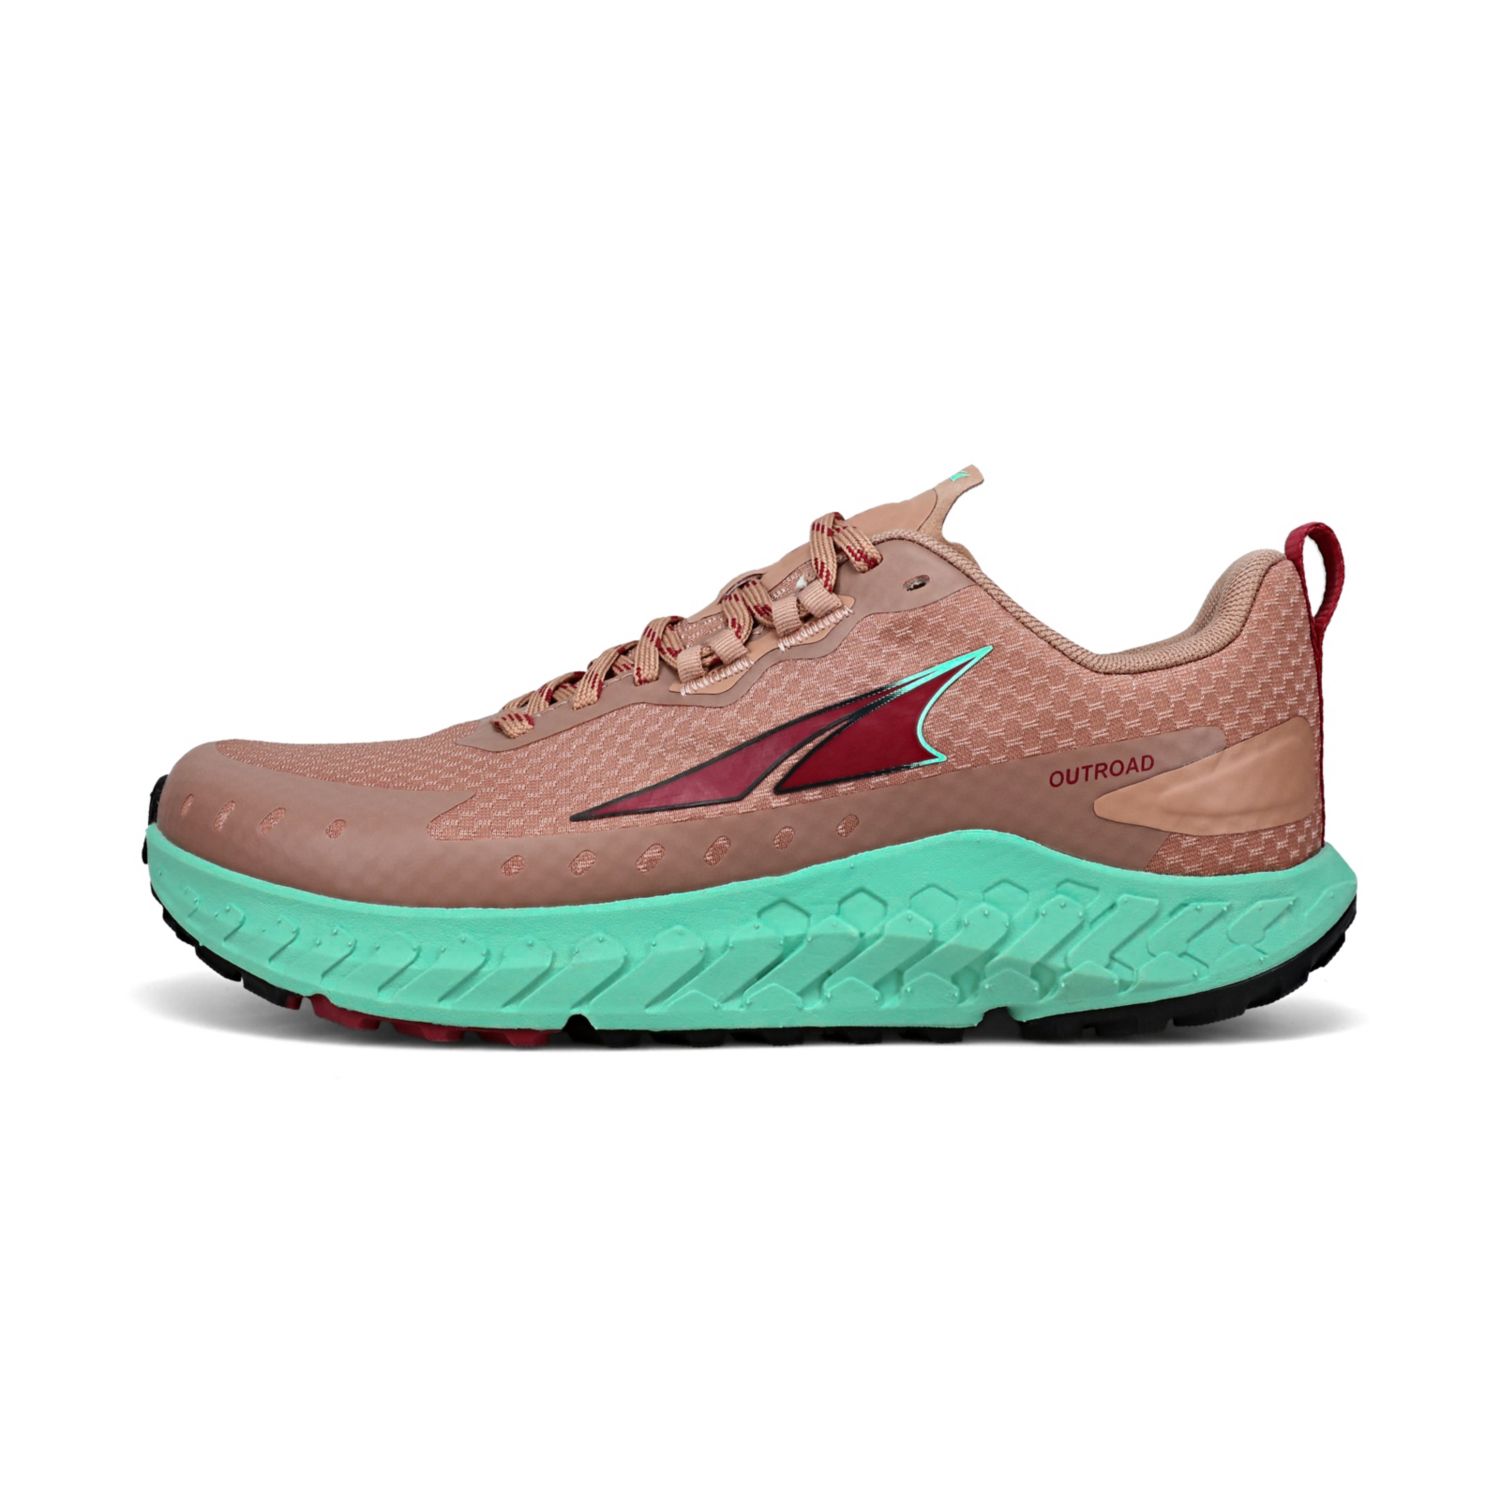 Brown Altra Outroad Women's Road Running Shoes | Ireland-65740139